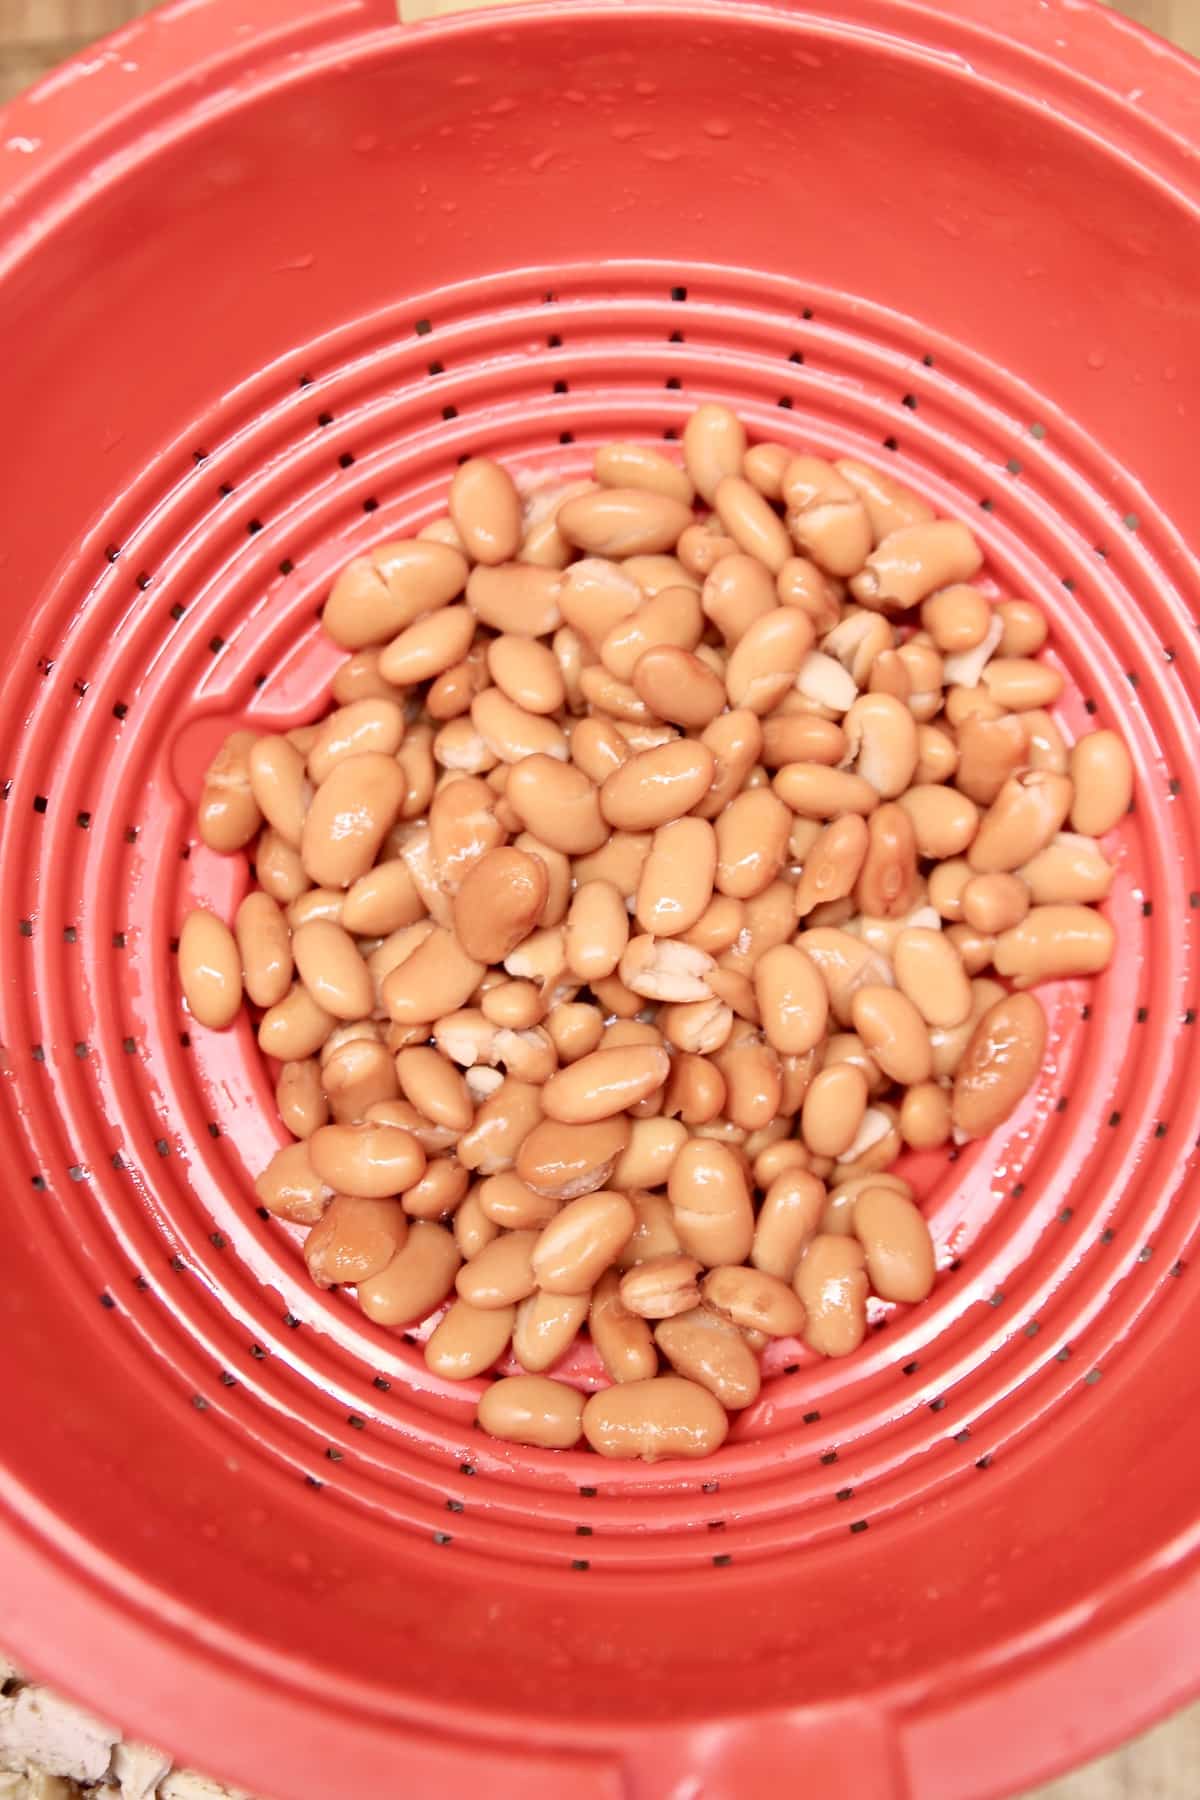 Drained pinto beans in red colander.